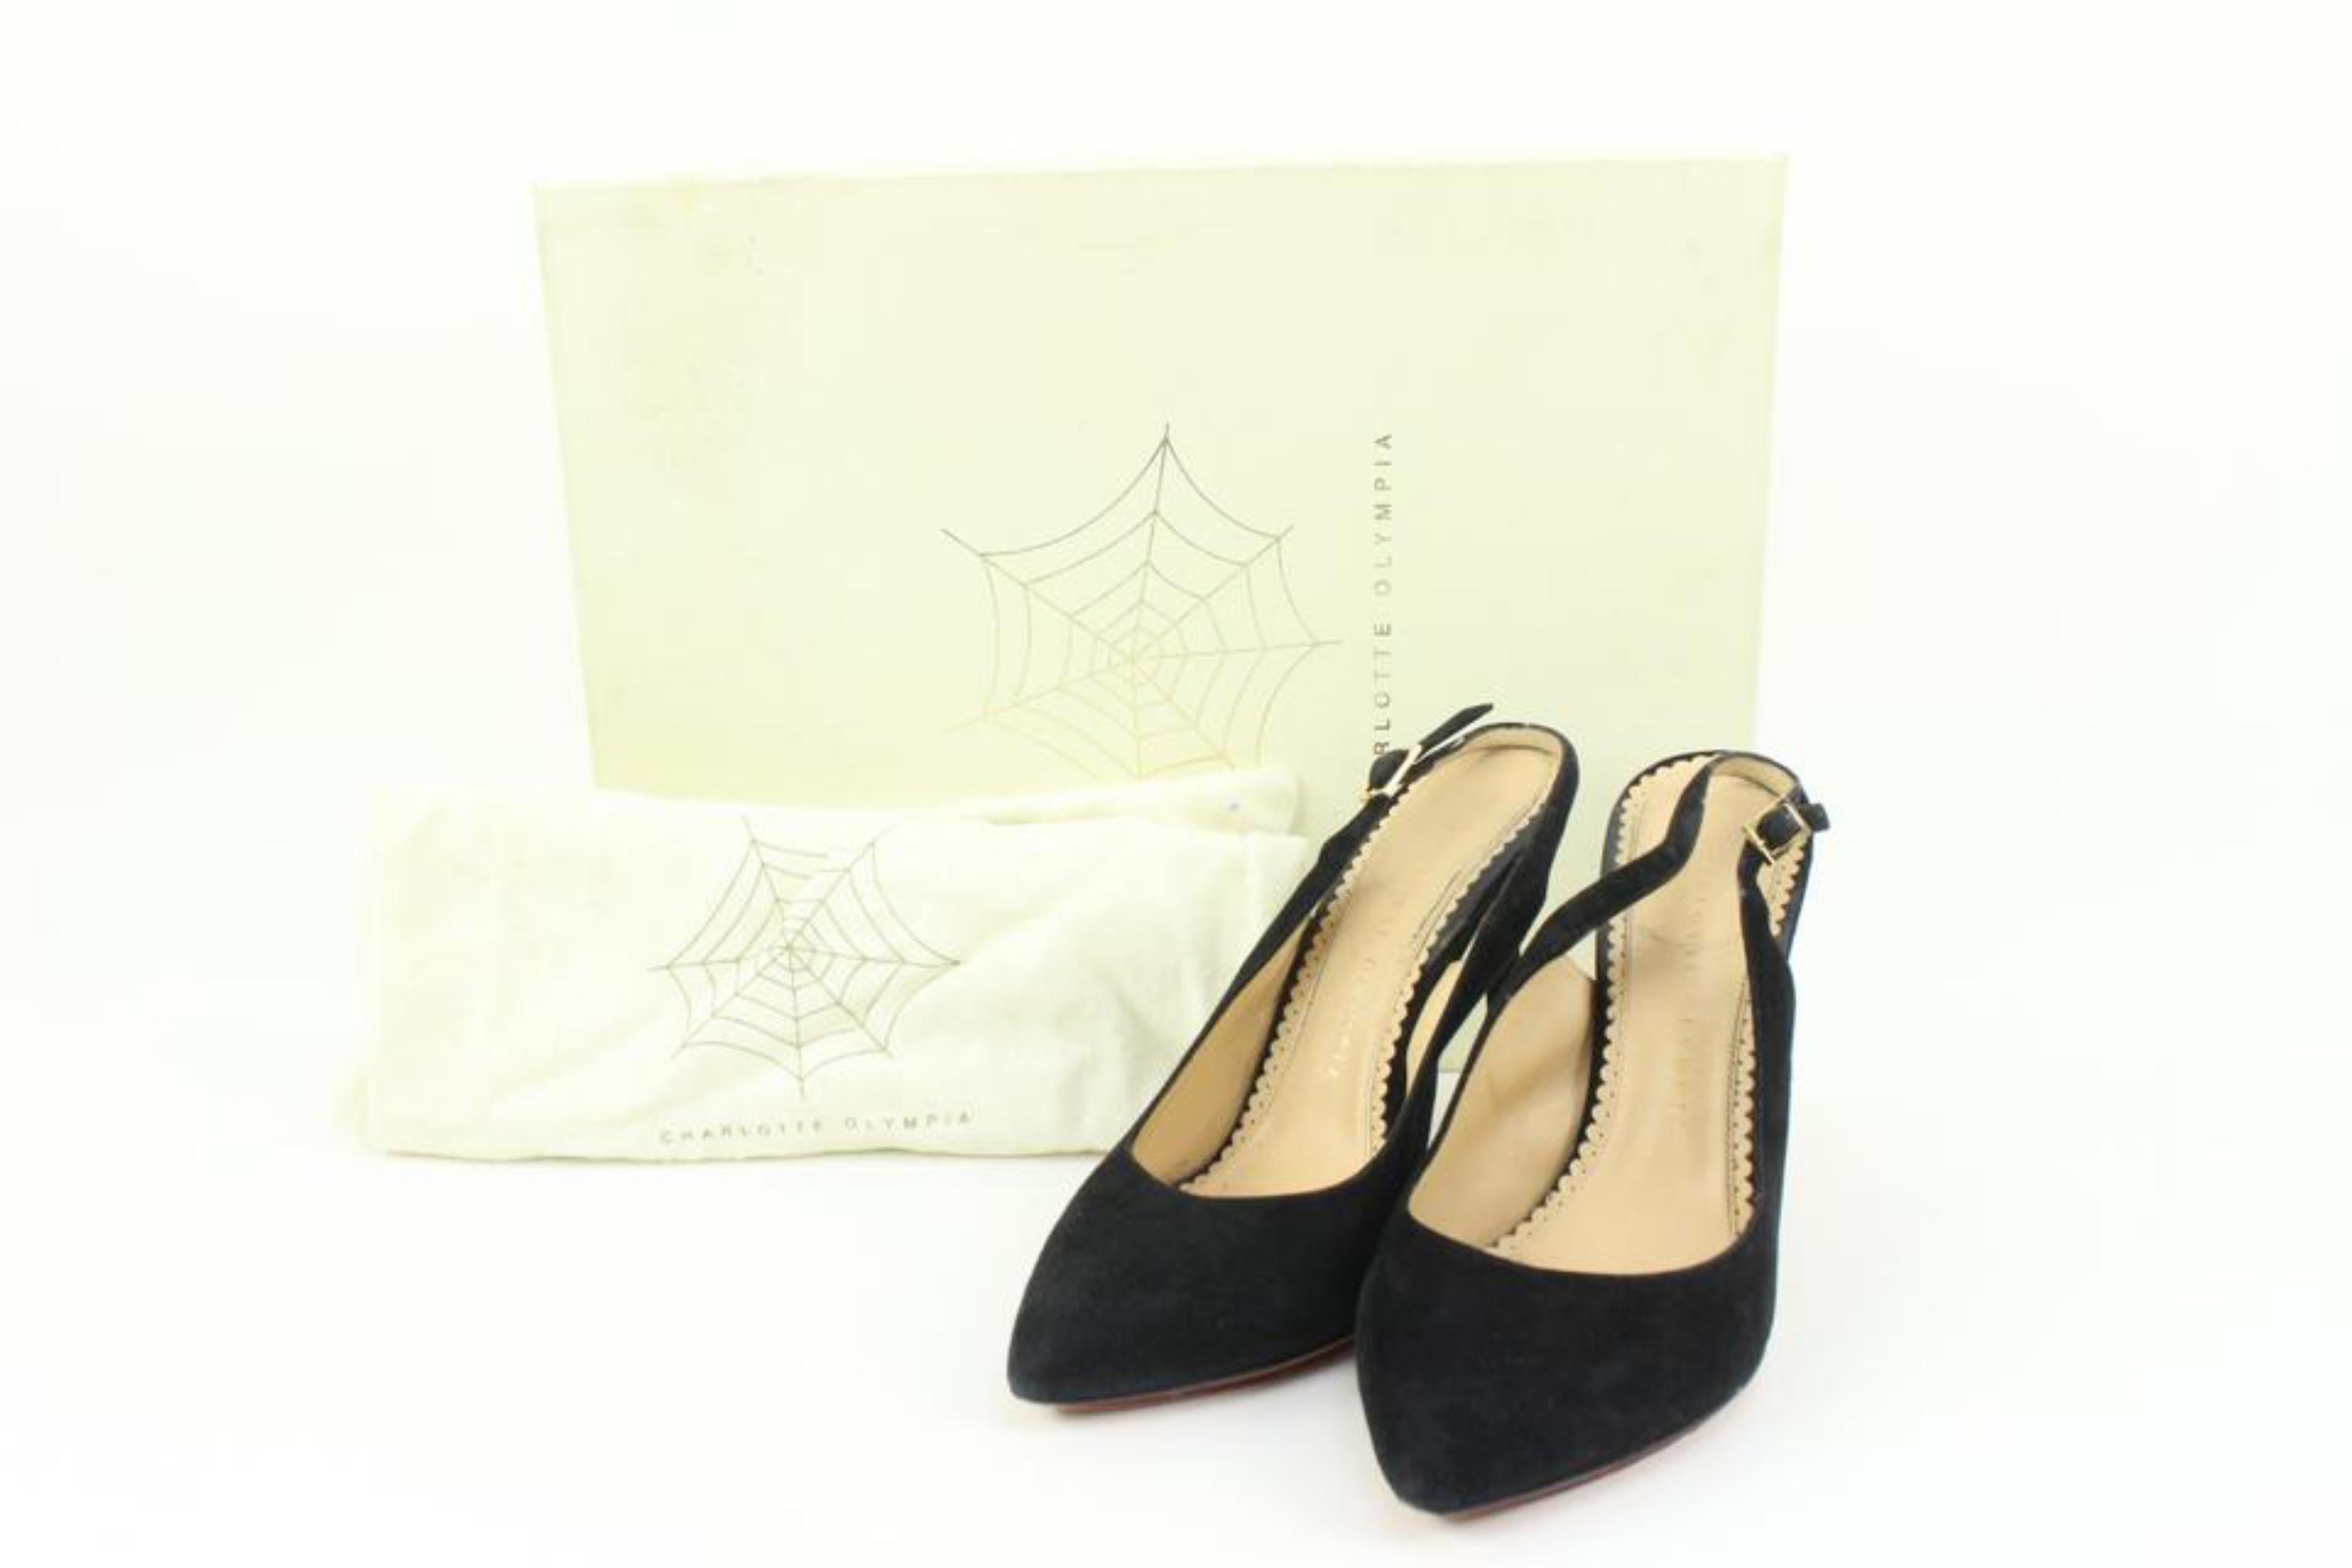 Charlotte Olympia Size 36.5 Black Suede Slingback Heels 50co37s
Made In: Italy
Measurements: Length:  9.2